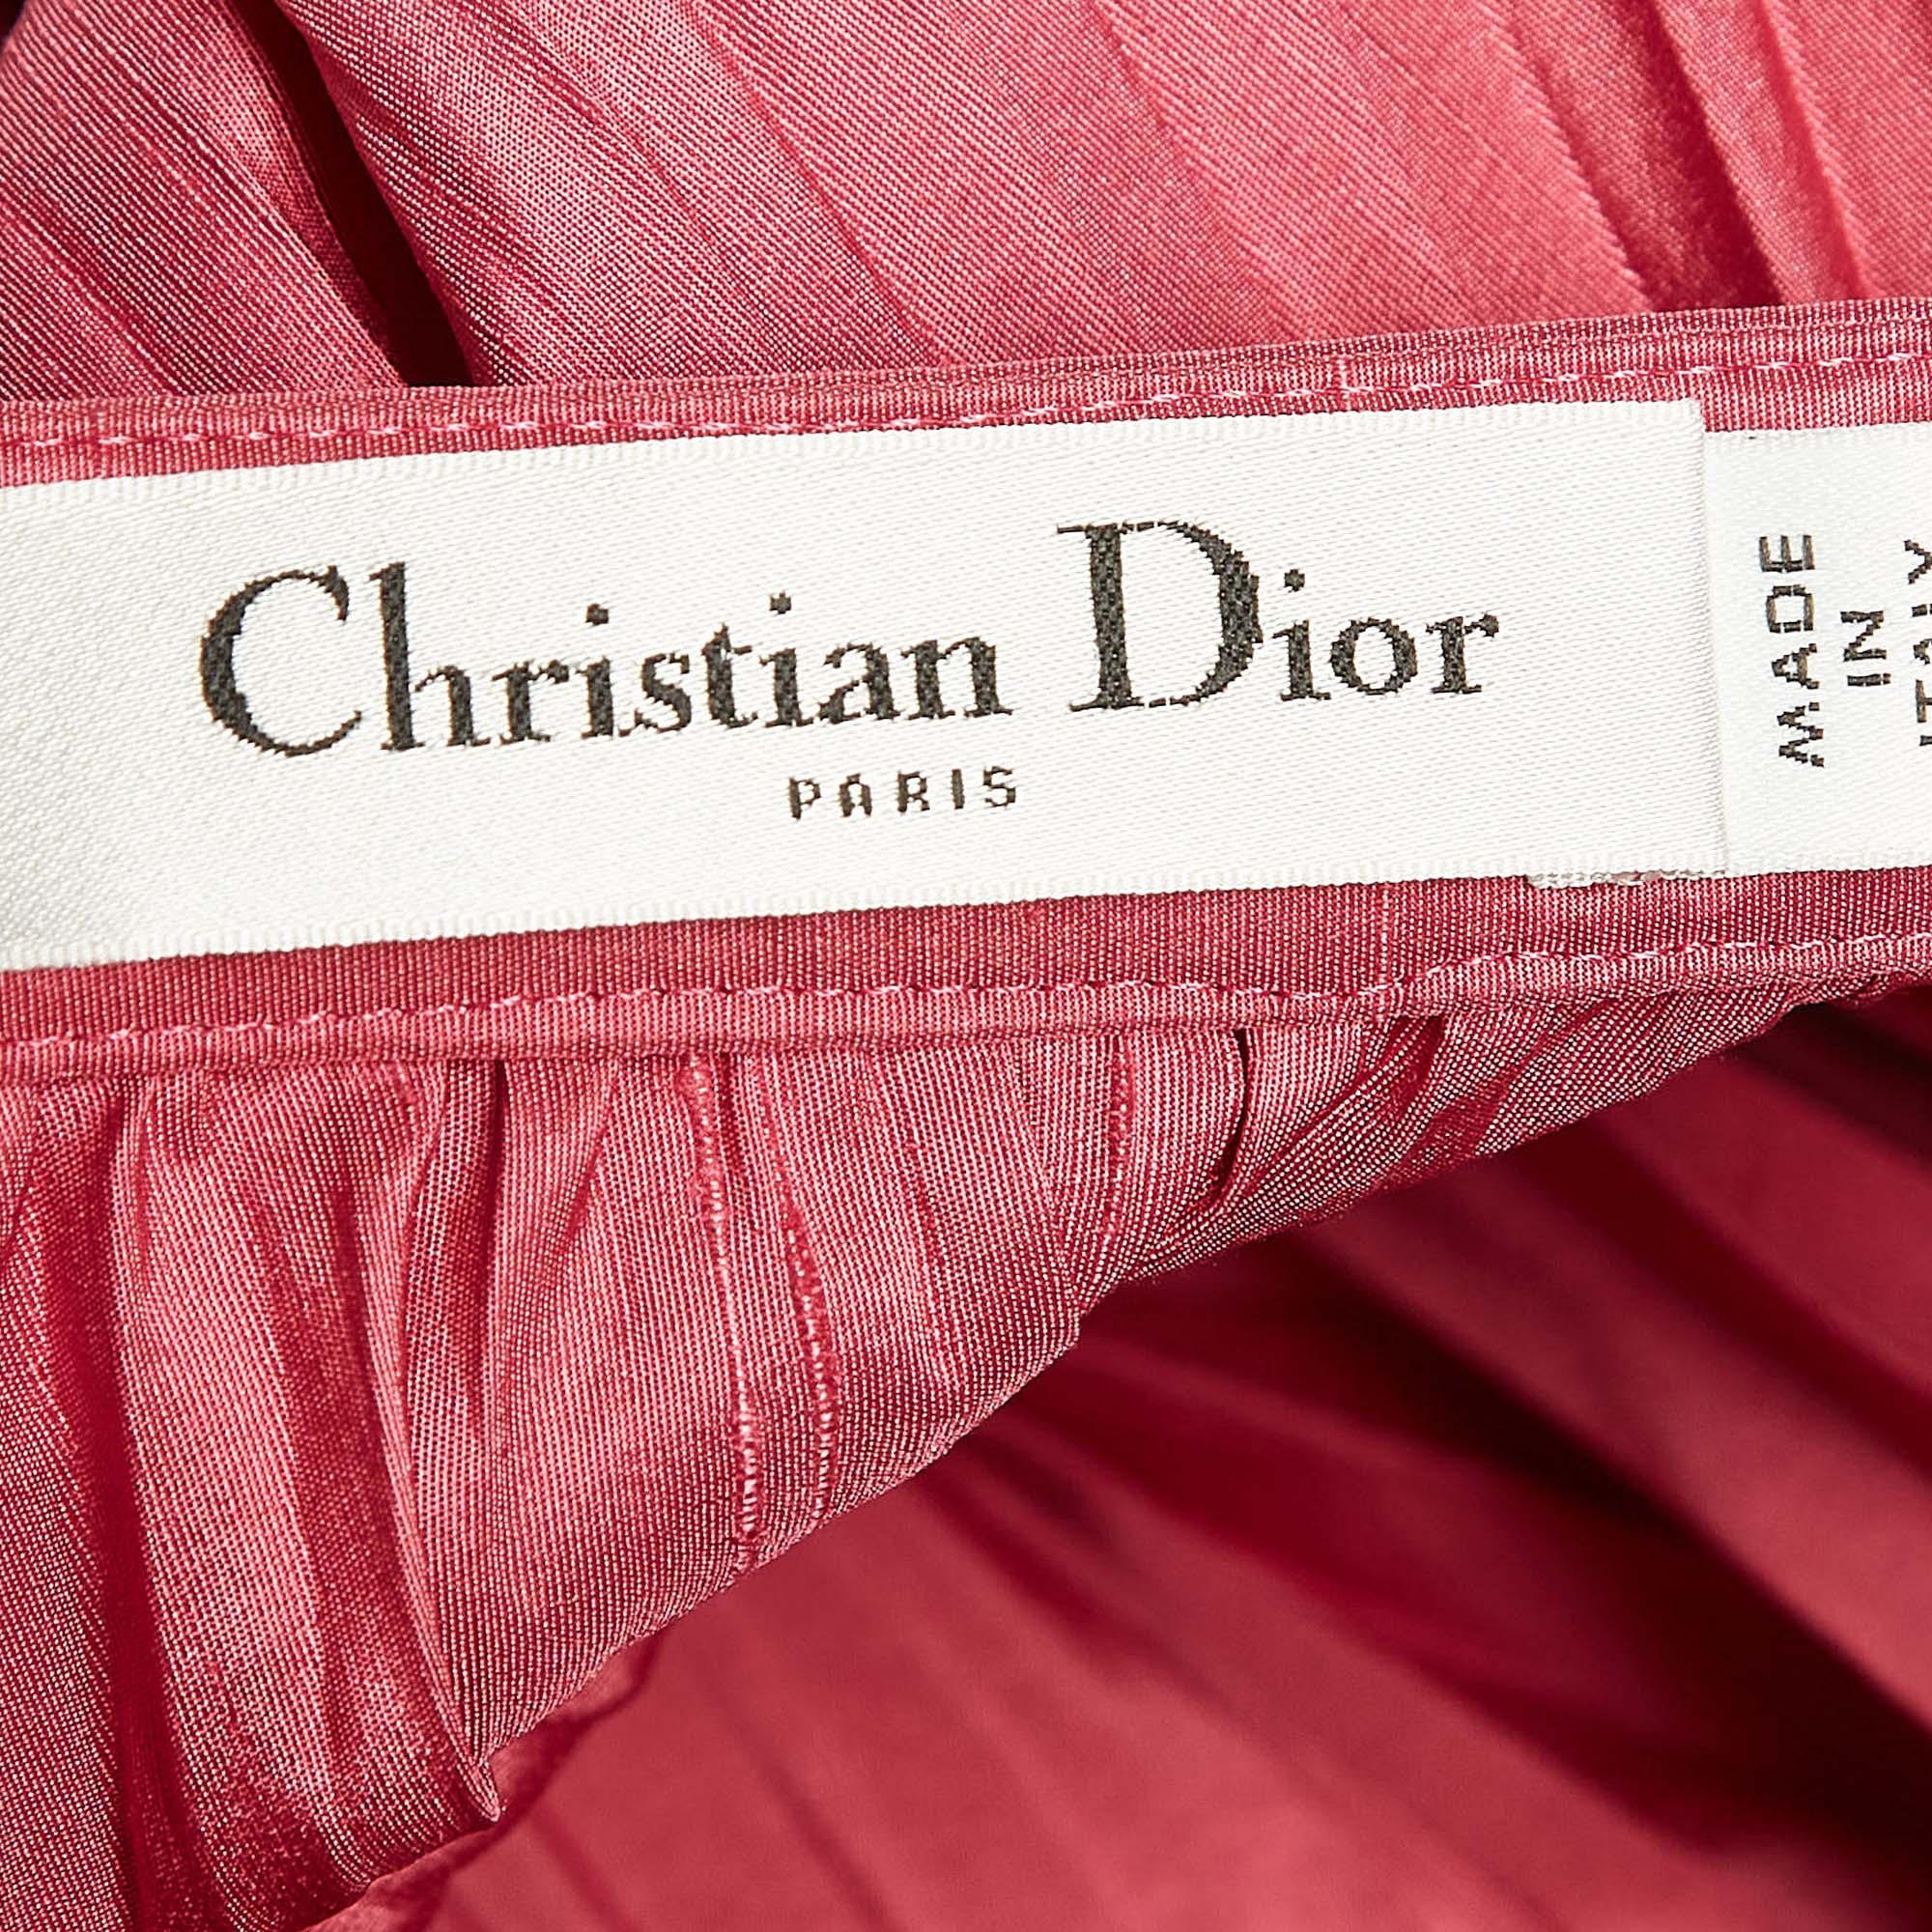 Experience the charm of designer clothing with this gorgeous Dior midi skirt. Made from silk, the skirt has high allure and a great fit. Pair it up with a tailored blouse or a simple top and high heels.

